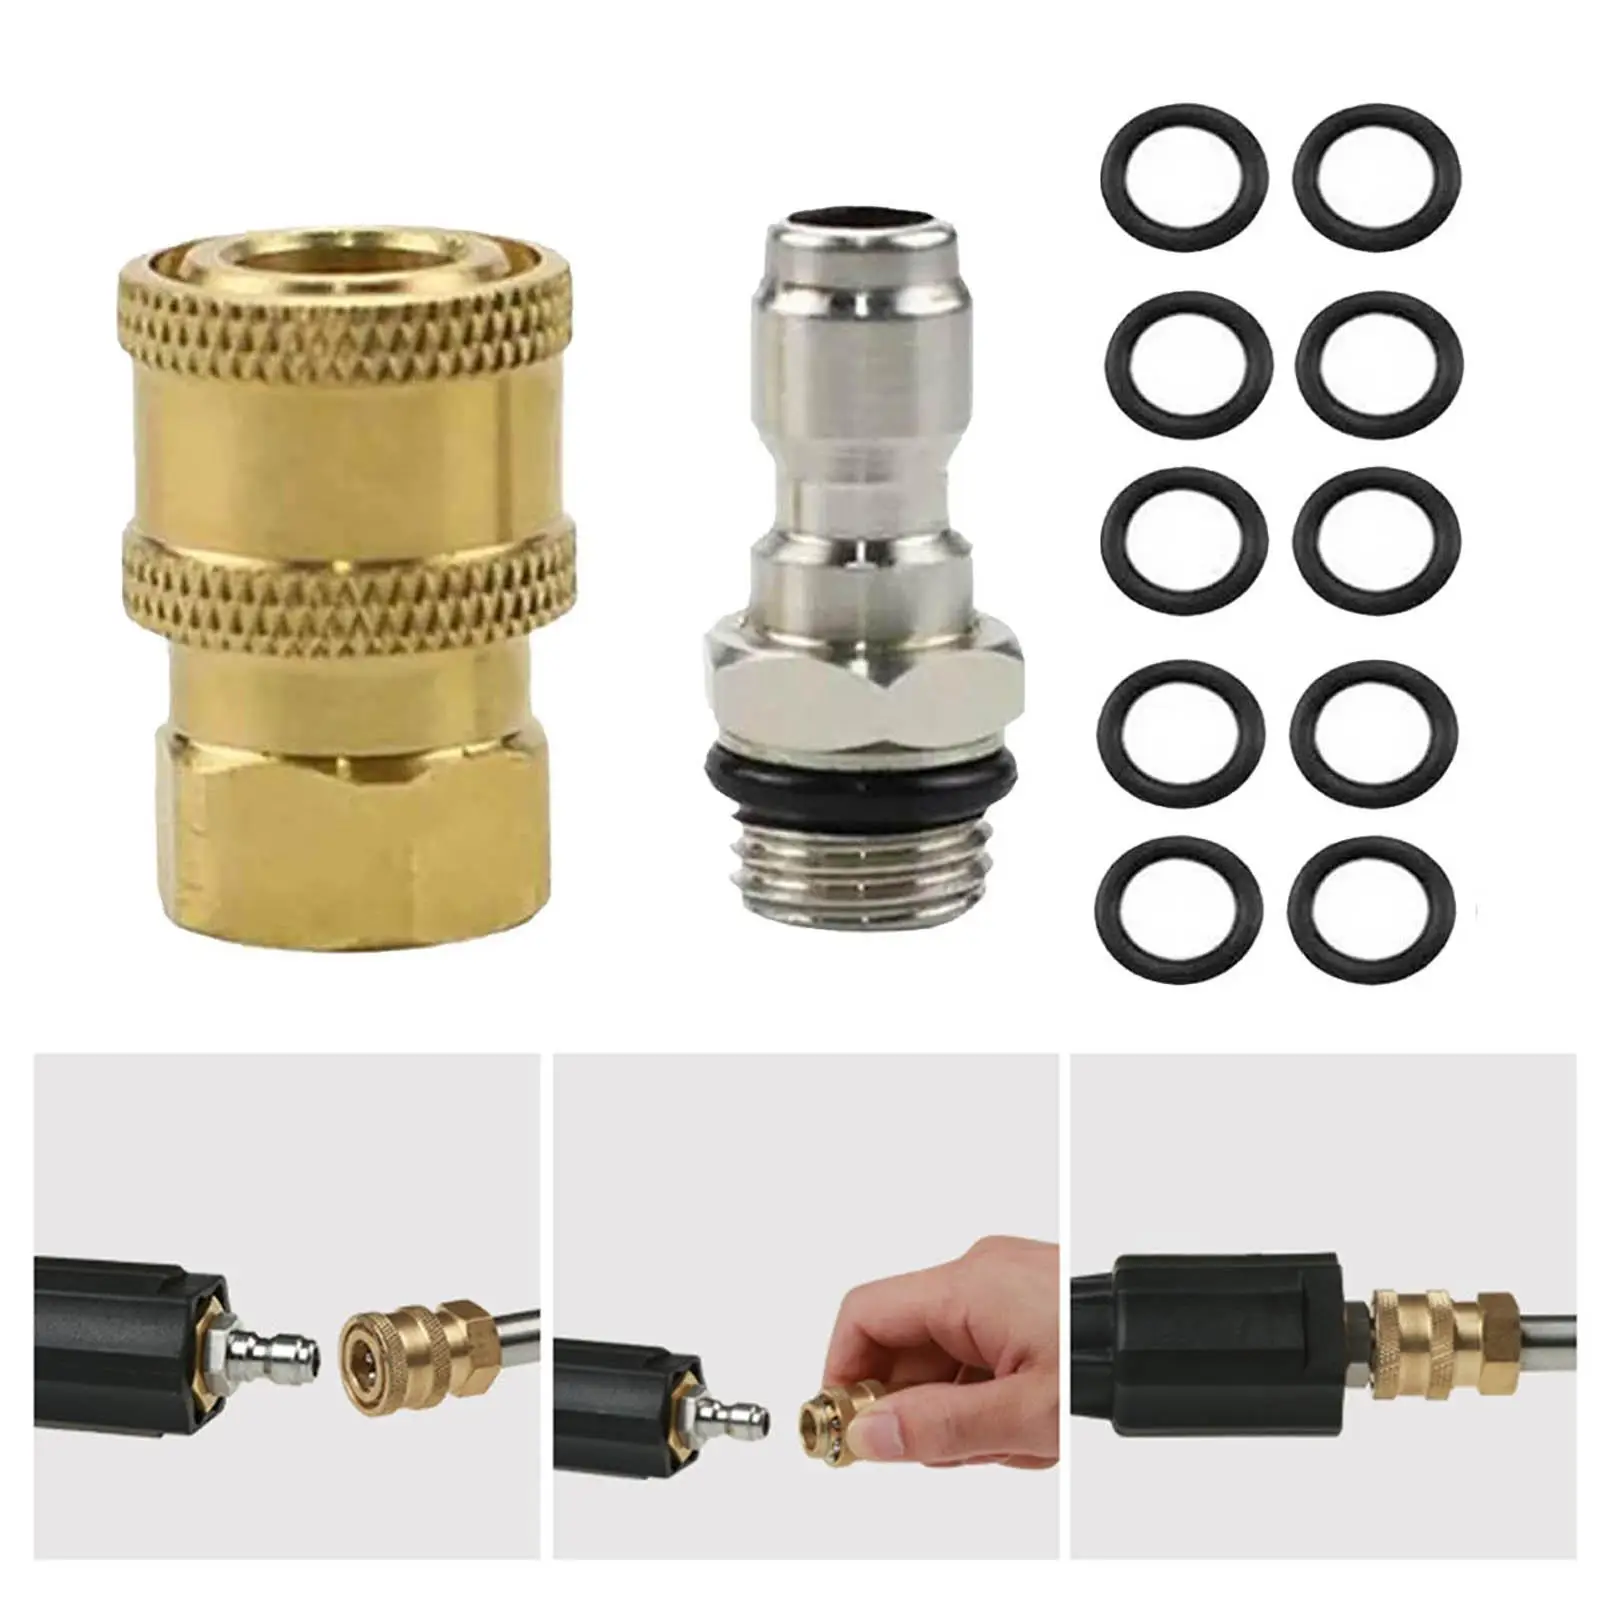 Pressure Washer Adapter Set,1/4 Inch Quick Disconnect Kit With 10 Pack O Ring.5000 Psi